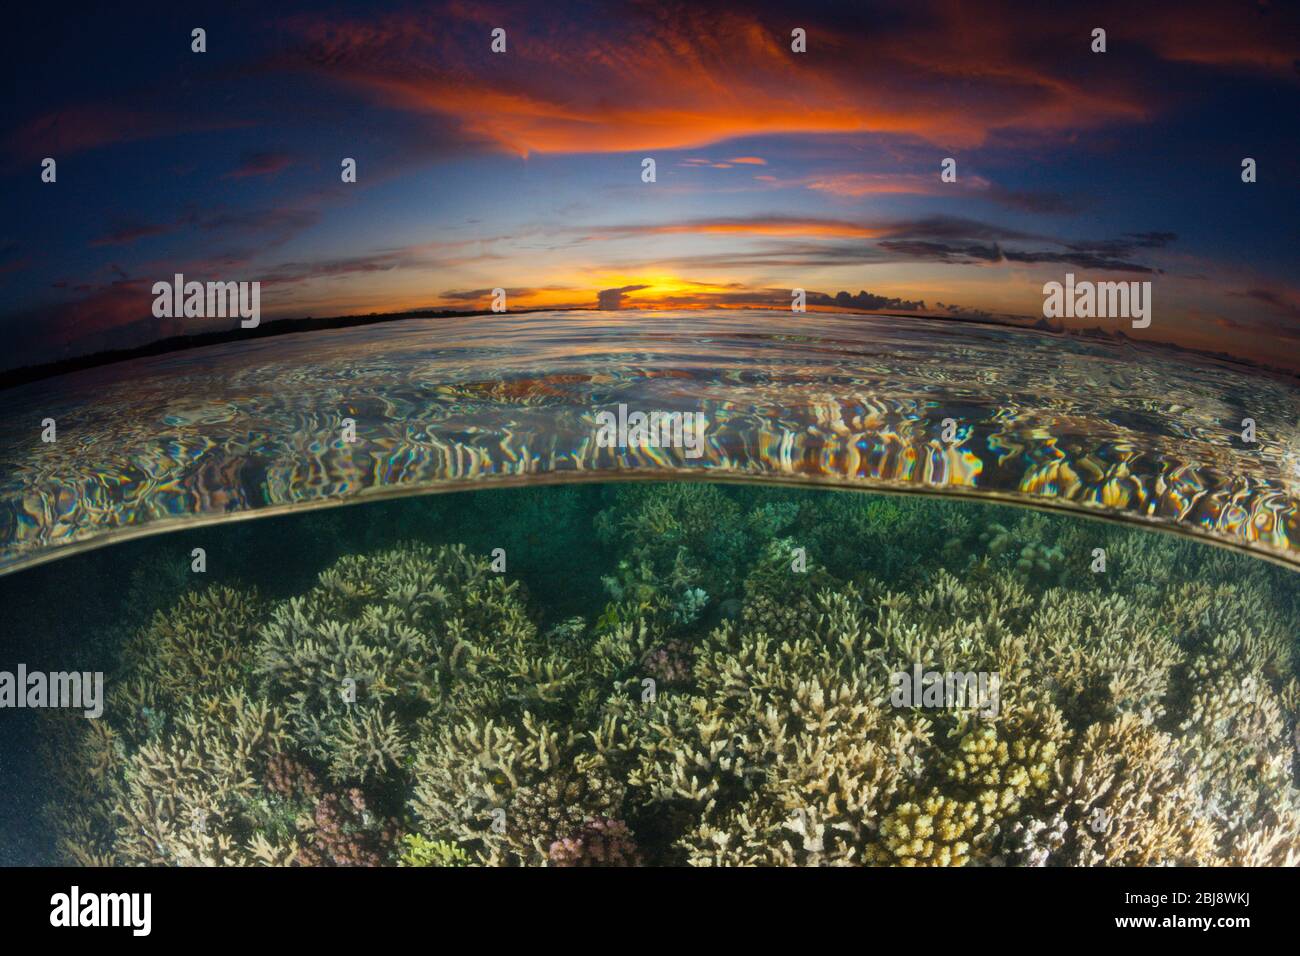 Coral Reef at Sunset, New Ireland, Papua New Guinea Stock Photo